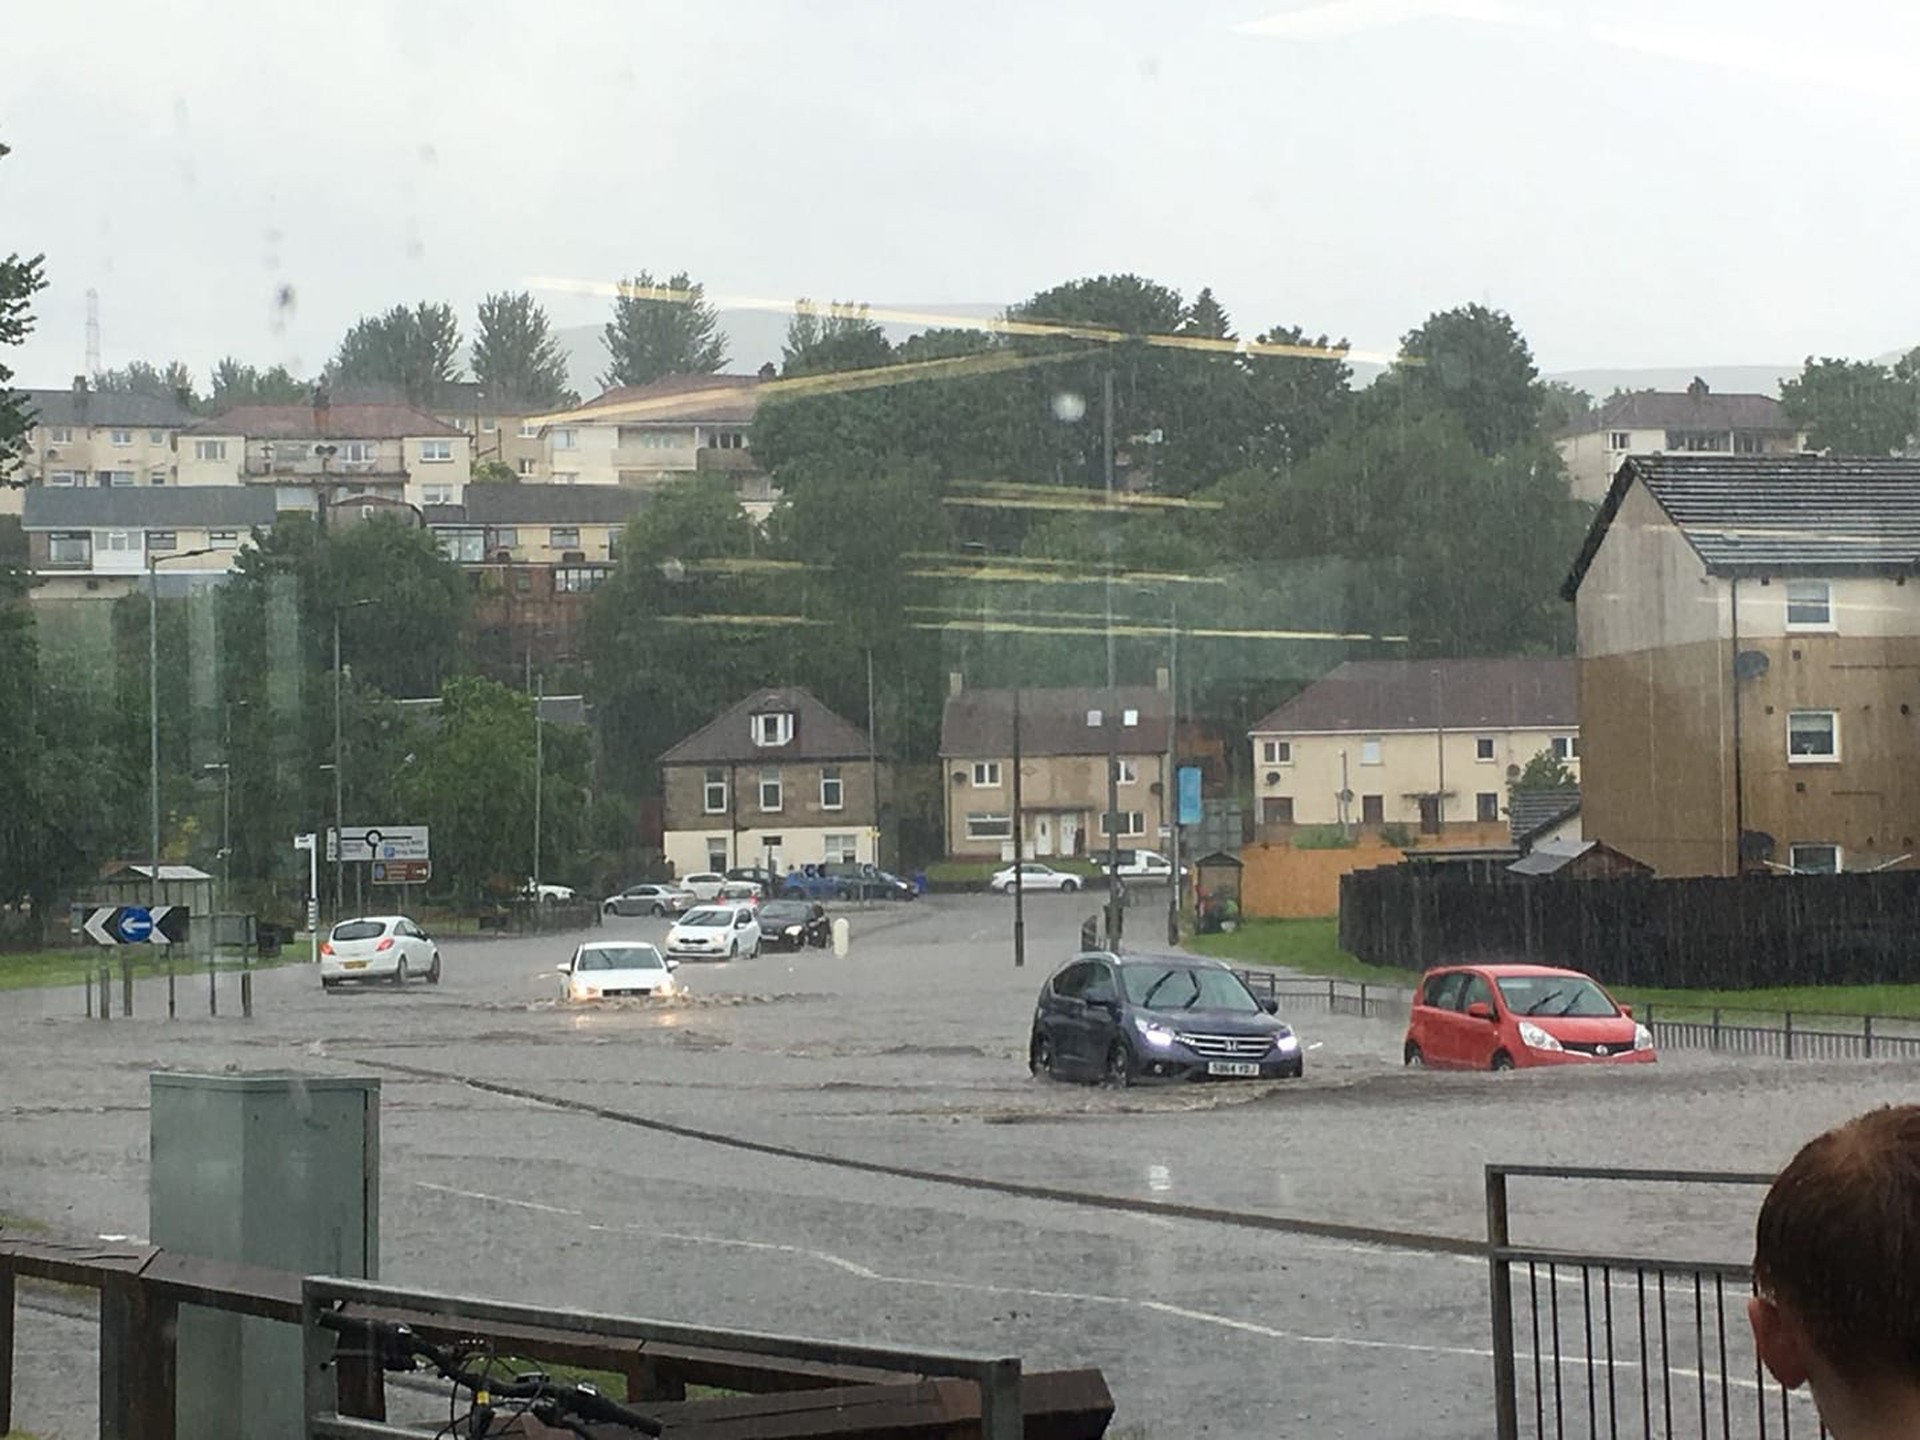 Flooding in Kilsyth (Colin Levey / Twitter)